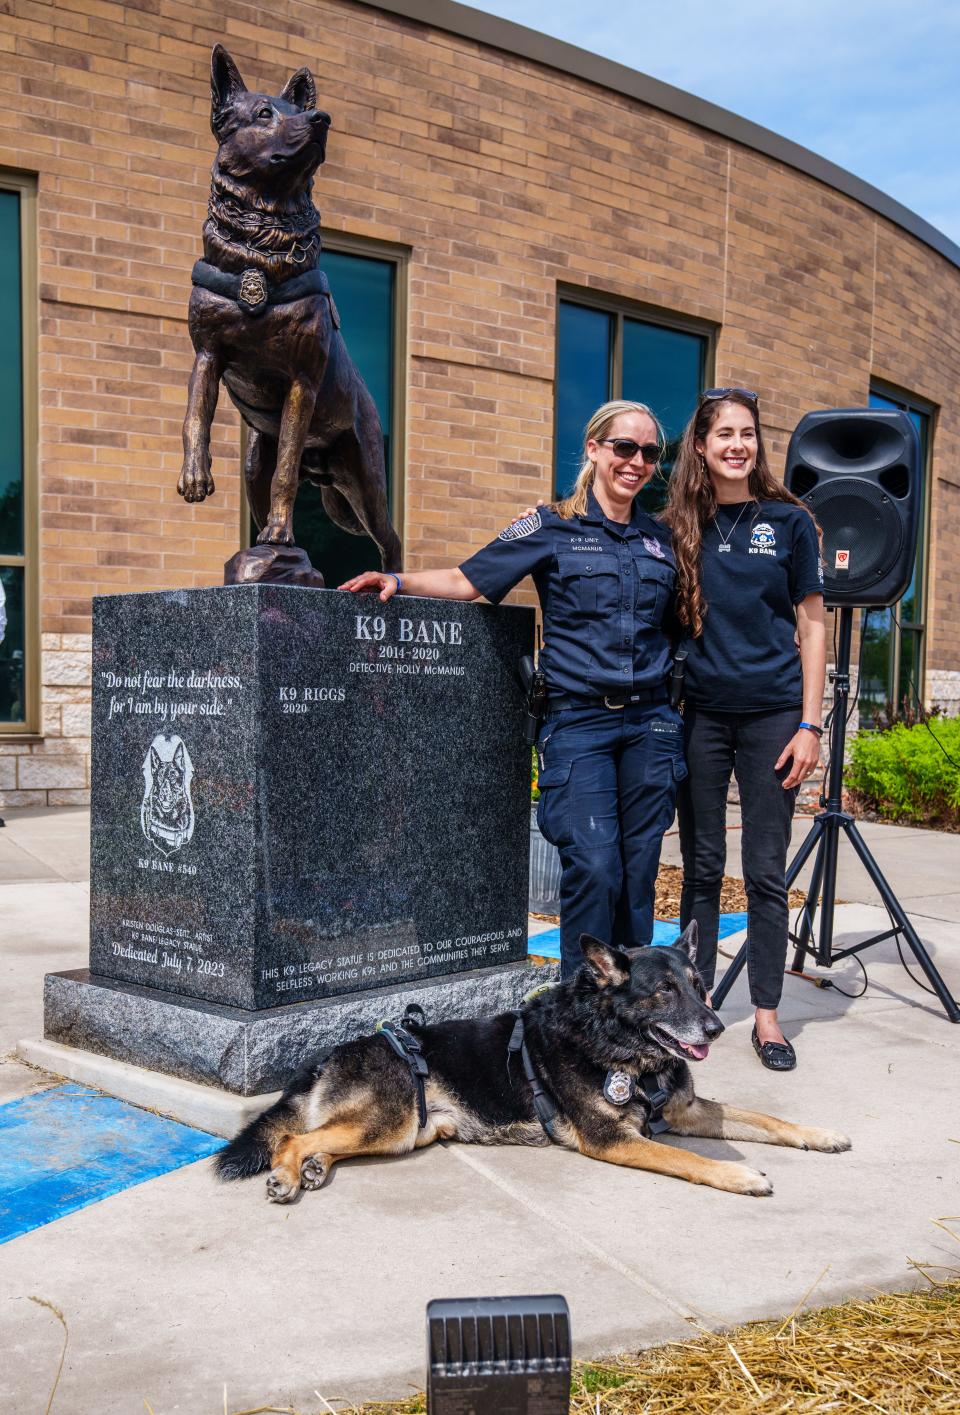 St. Francis Police Detective Holly McManus and her retired K9 partner Bane, pose for photos with sculptor Kristen Douglas-Seitz and the newly unveiled K9 Legacy Statue at St. Francis Police Department on Friday, July 7, 2023. The life-size bronze statue of retired K9 Officer Bane honors his life and service along with former and future K9 Officers serving the community.